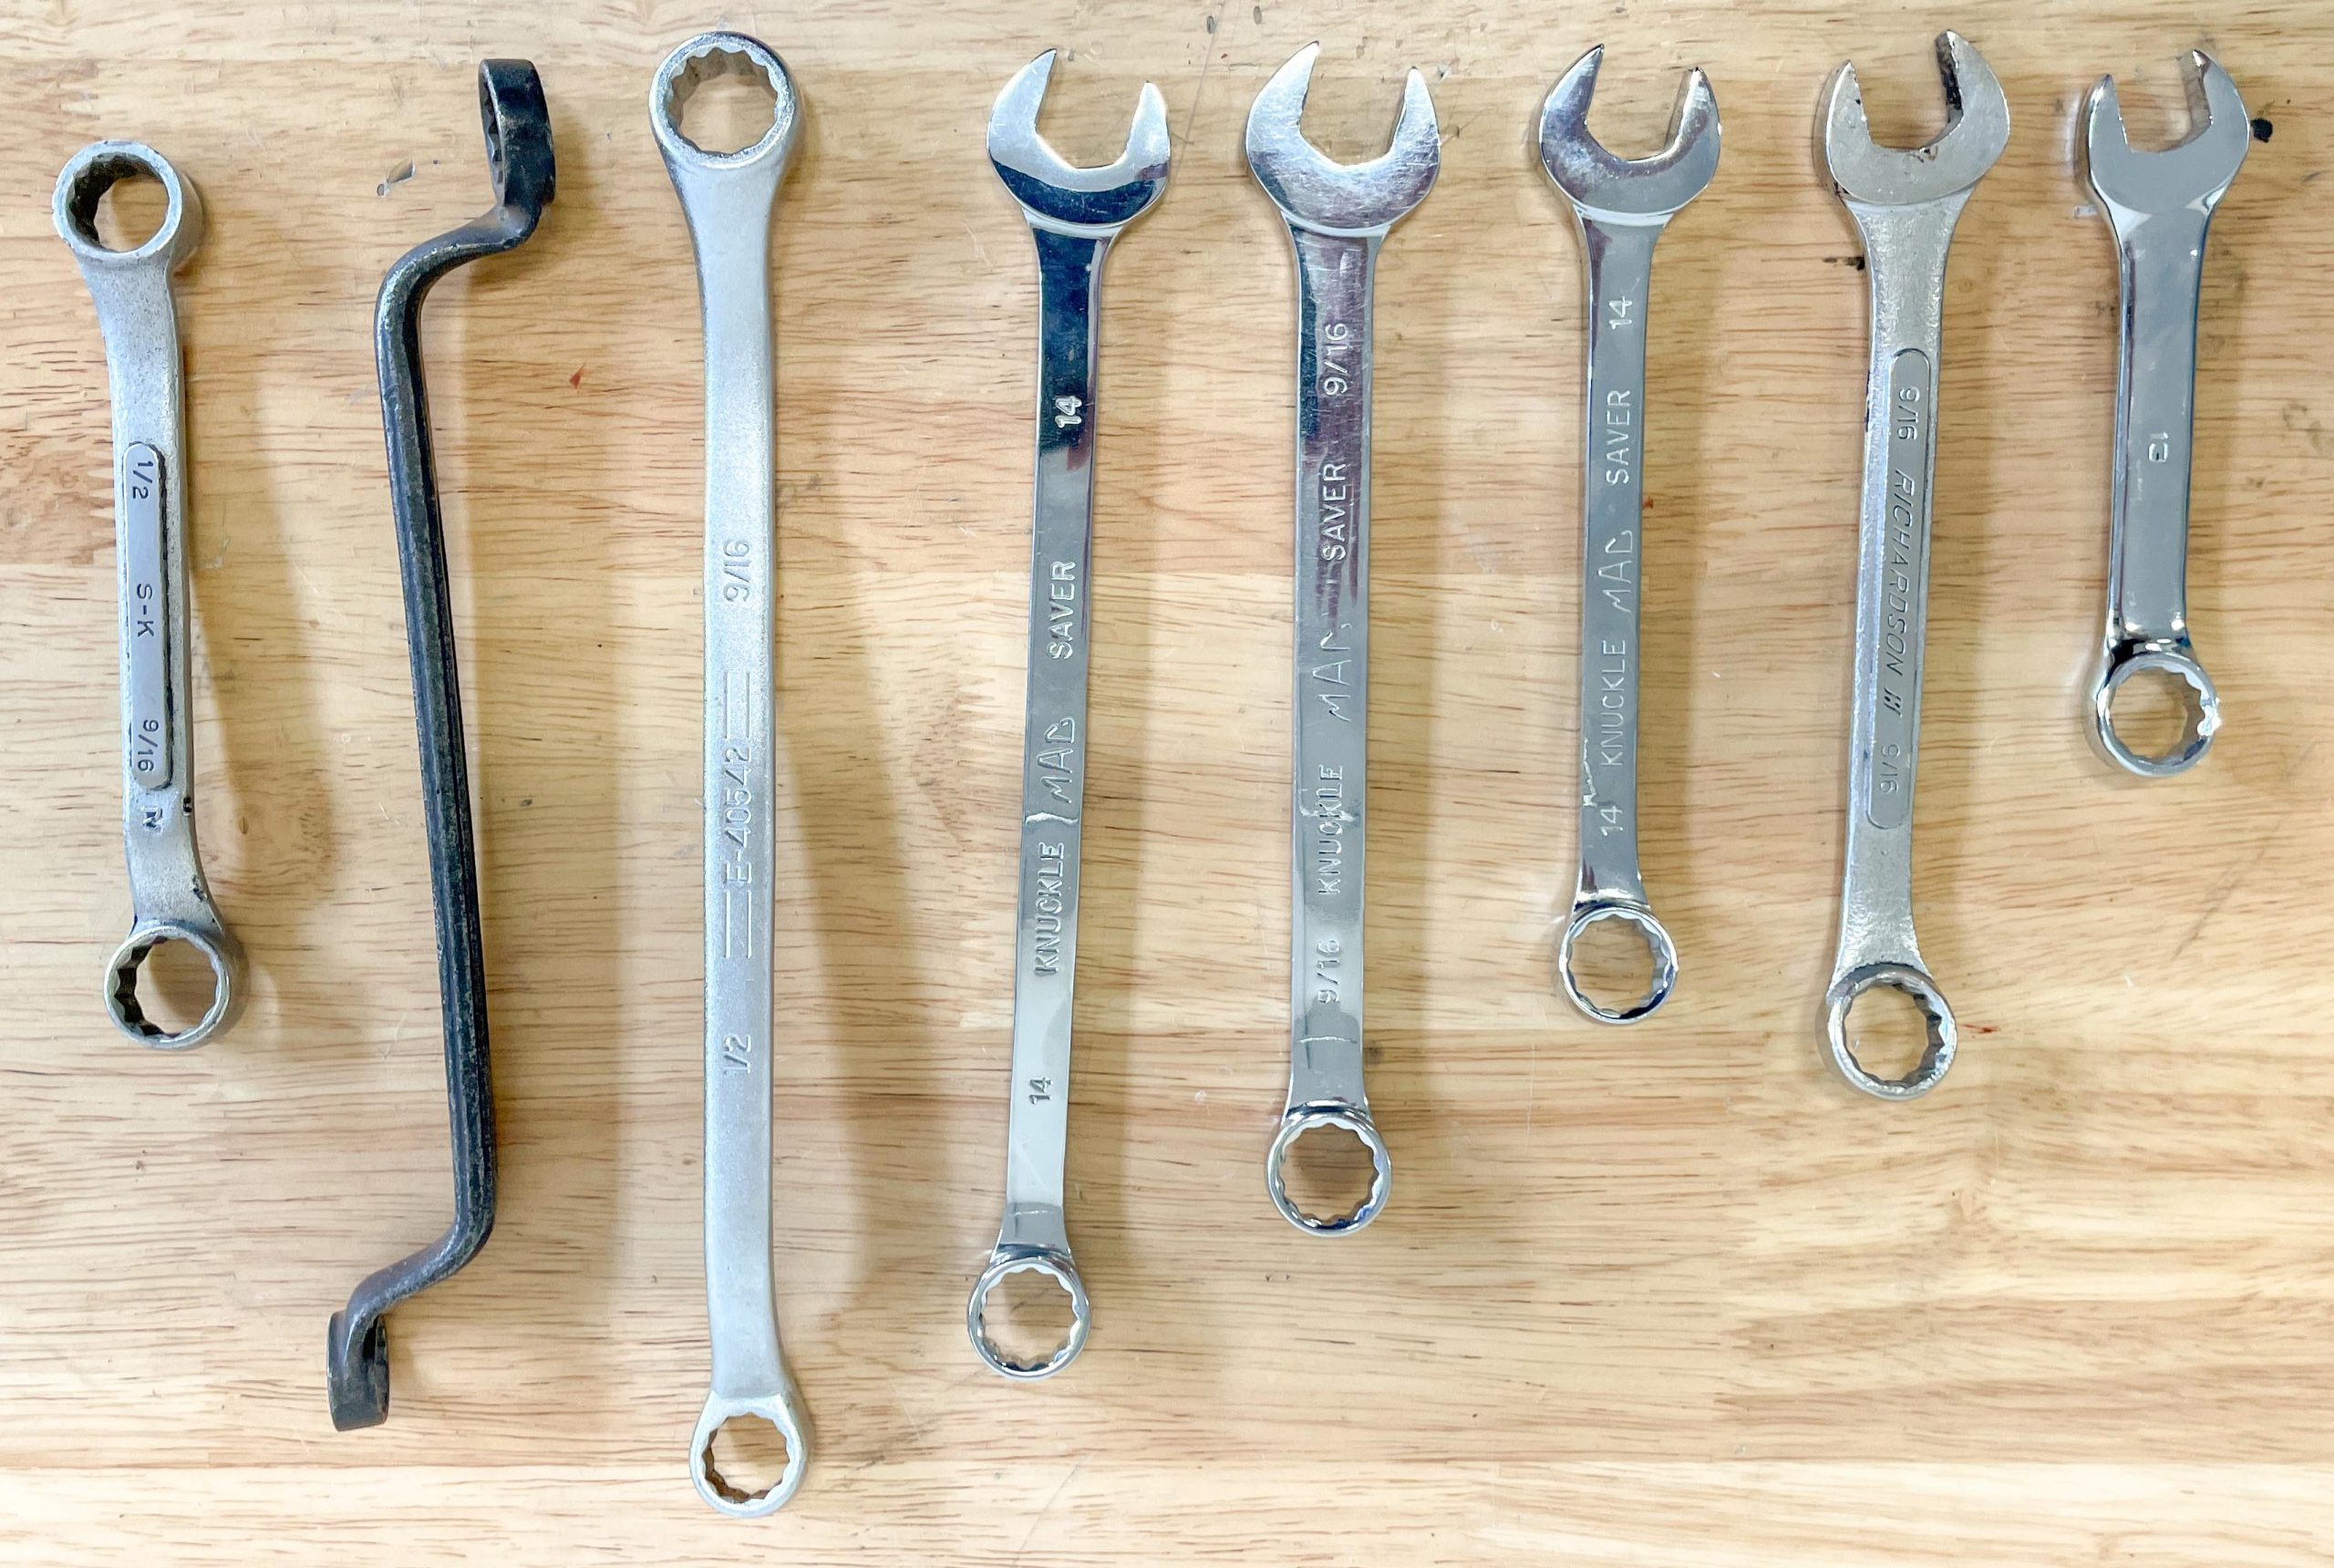 Boxed In: A Closer Look at Box End & Combination Wrench Designs